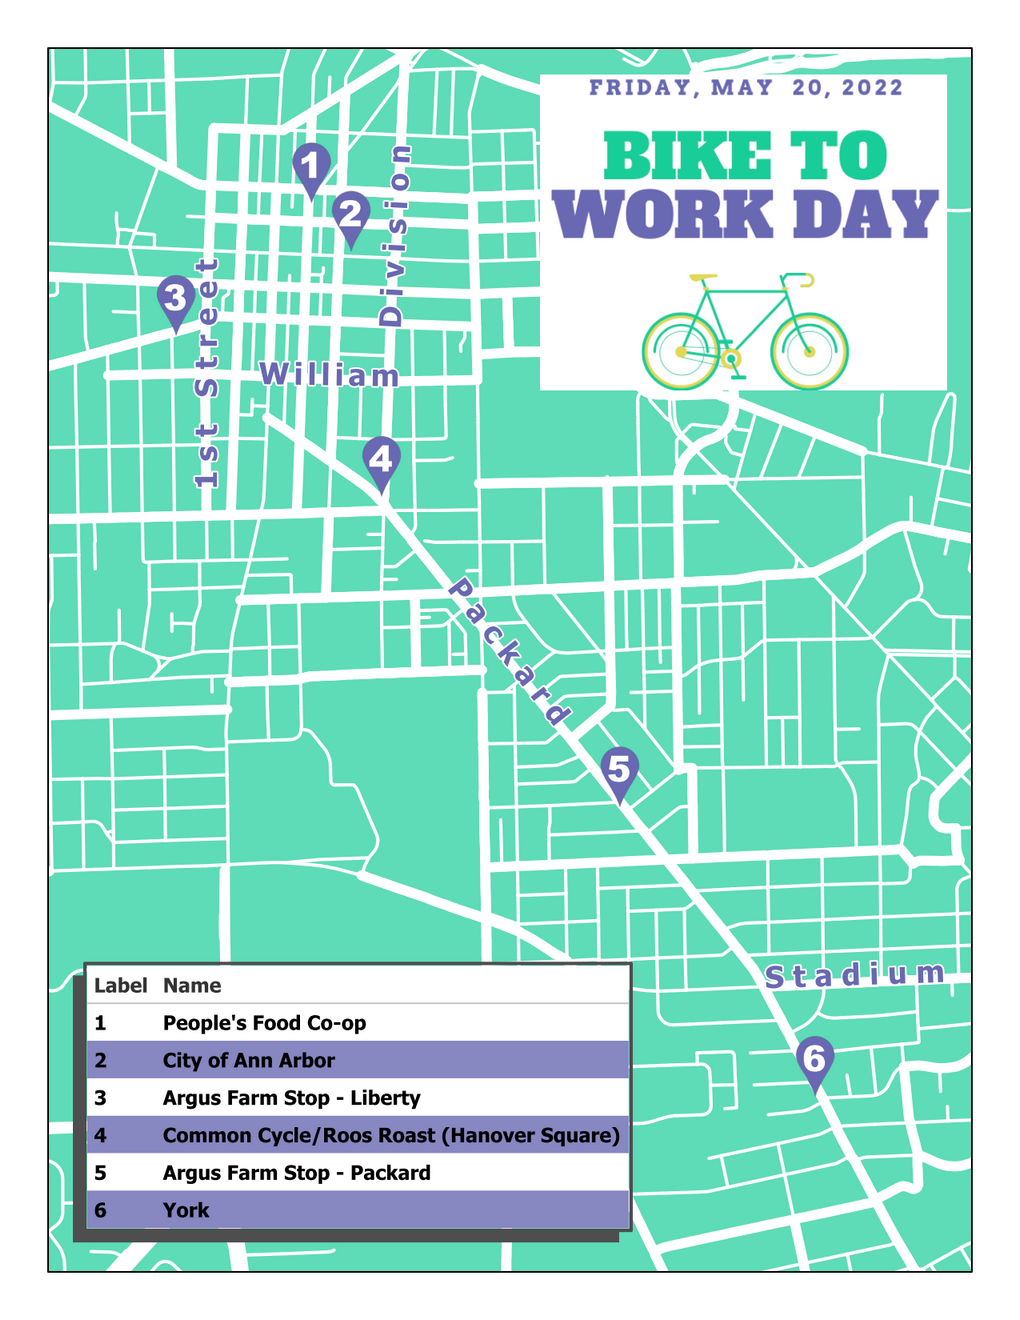 BtWD_Map_2022.png